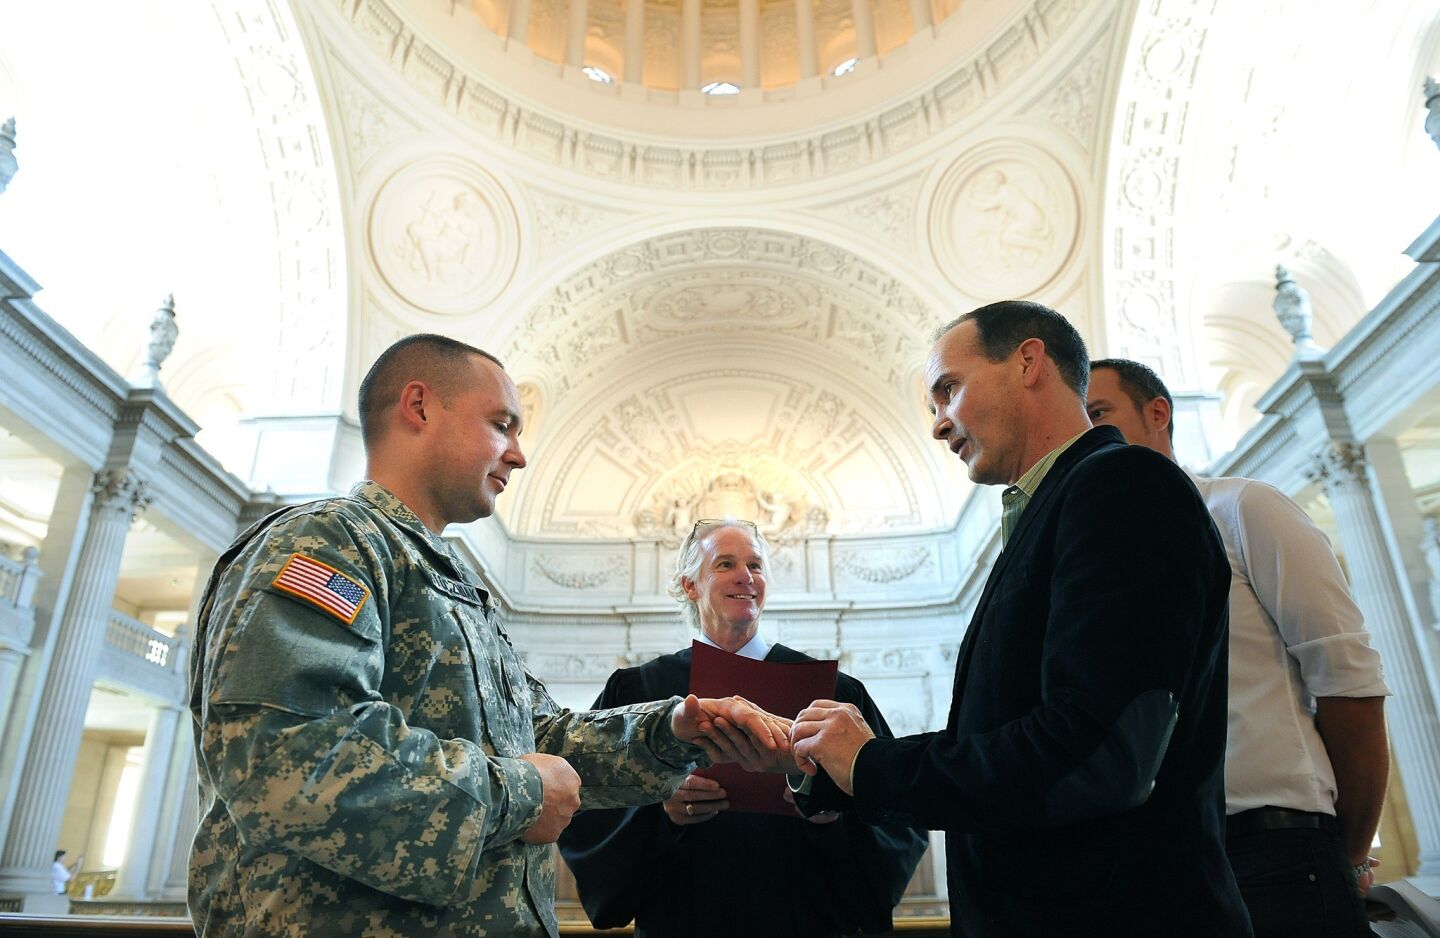 Army Sgt. Michael Potoczniak and his partner Todd Saunders exchange rings during a marriage ceremony at City Hall in San Francisco Saturday.